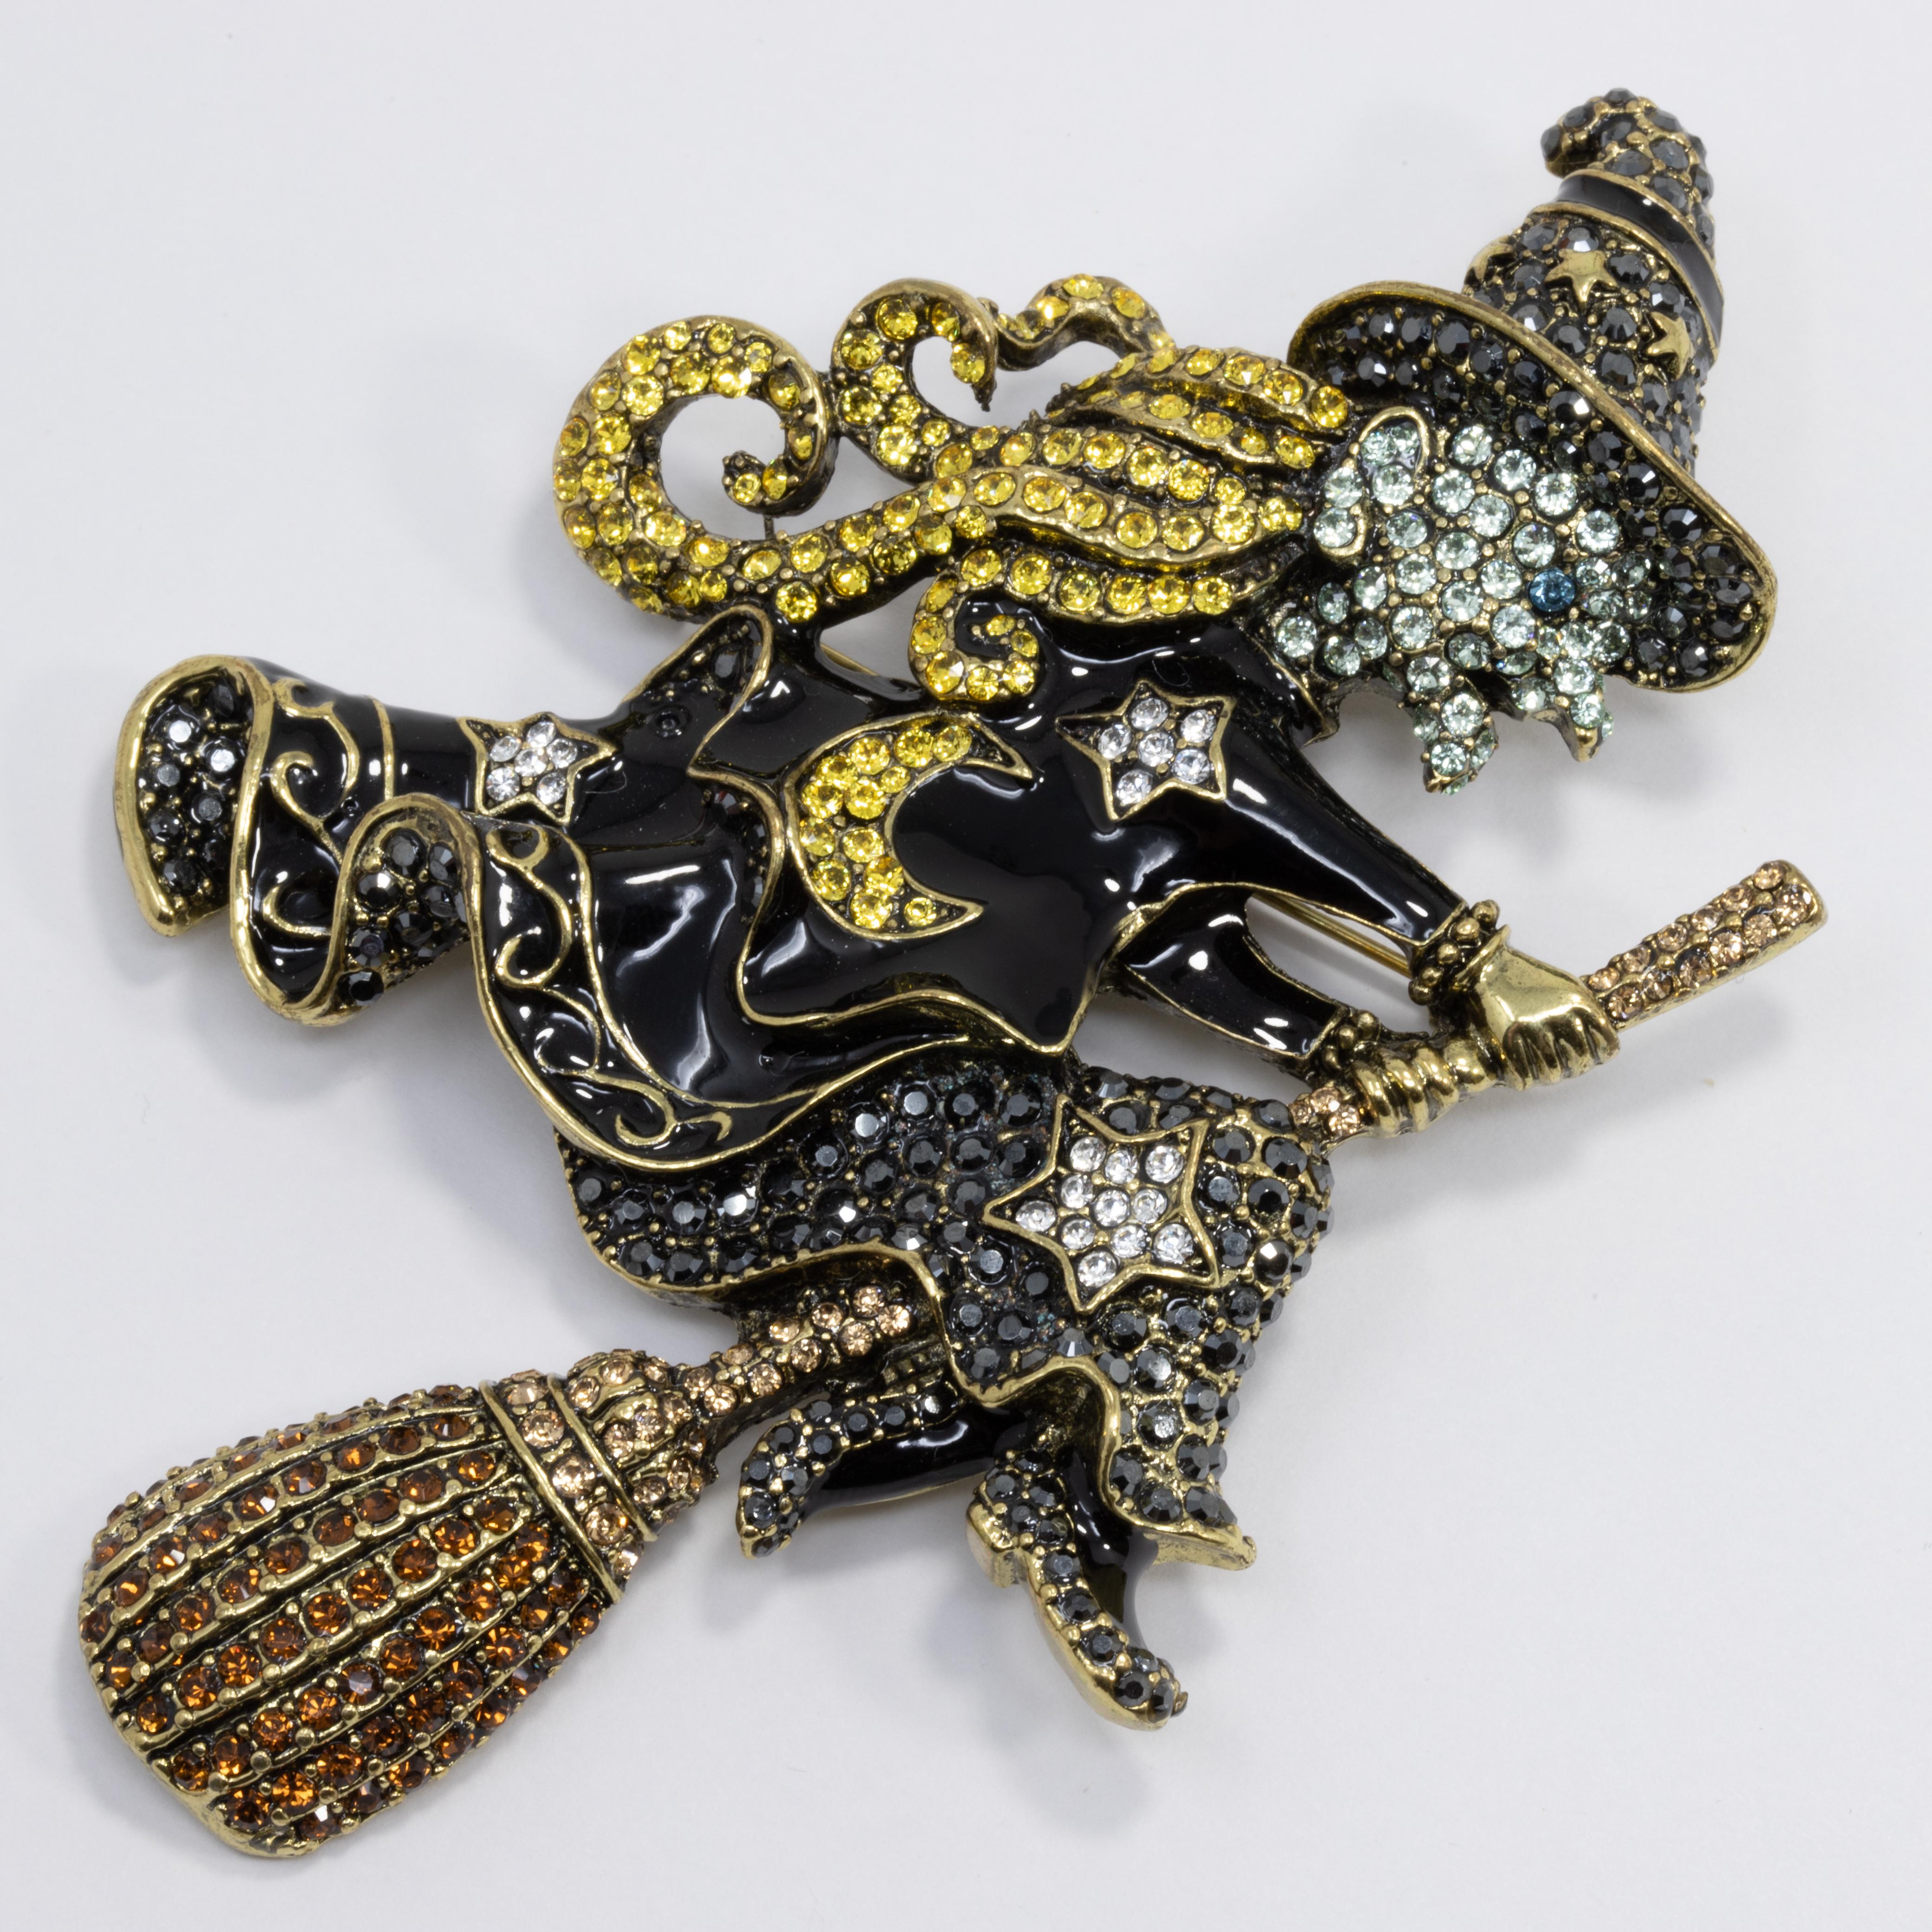 A whimsical pin by Heidi Daus. This lovely brooch features a witch on a broom, decorated with colorful pave crystals and painted with black enamel. Set on matching brass tone metal.

Hallmarks: Heidi Daus, CN